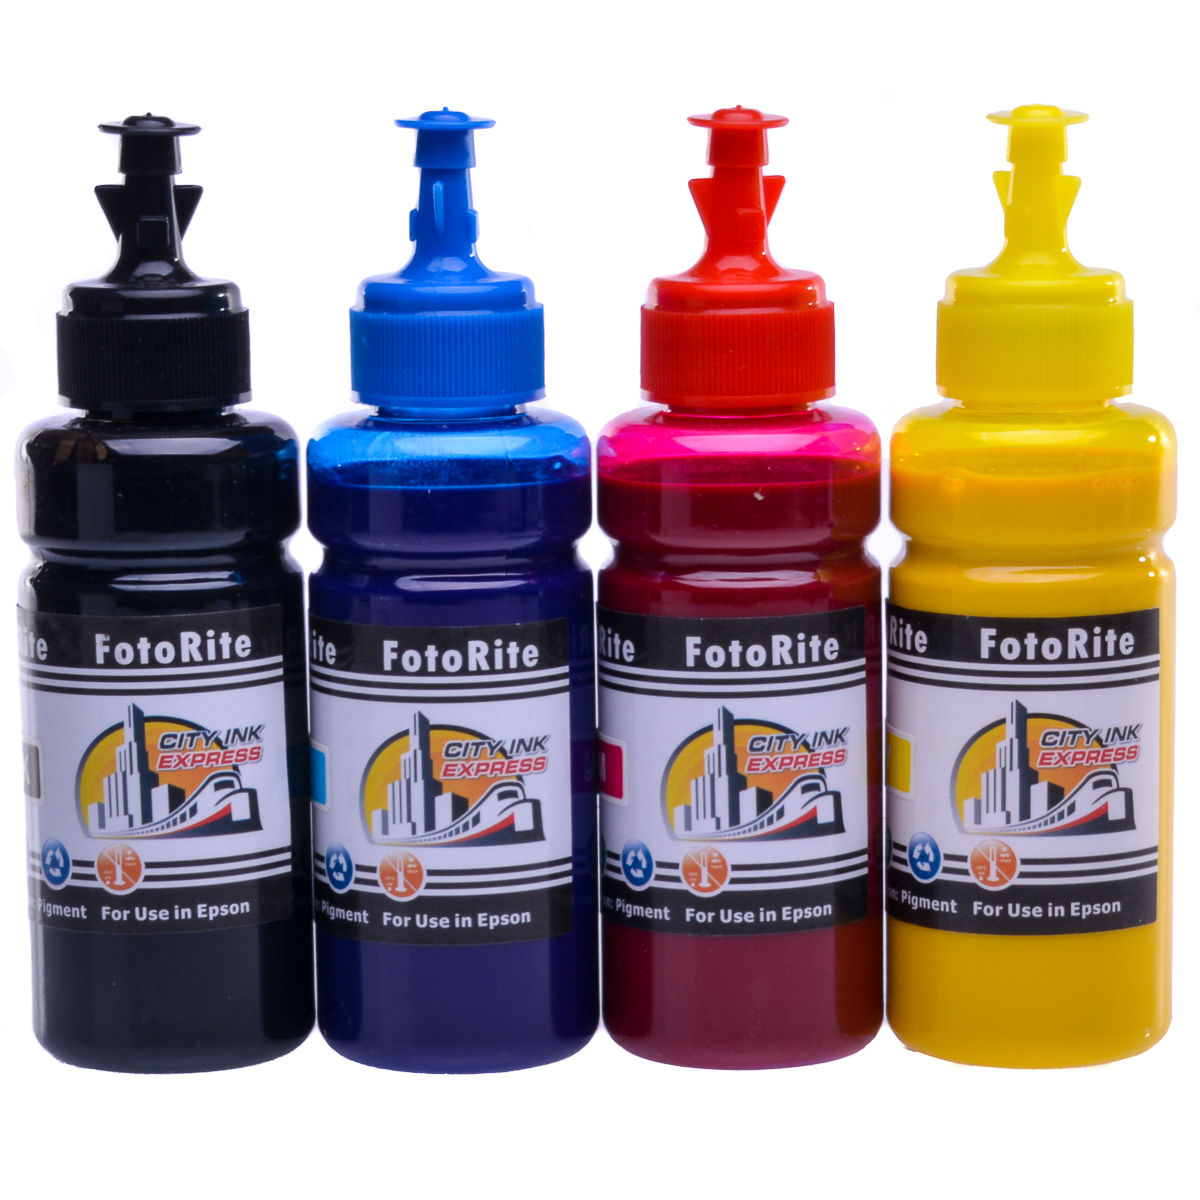 Cheap Multipack pigment ink refill replaces Epson ET-5150